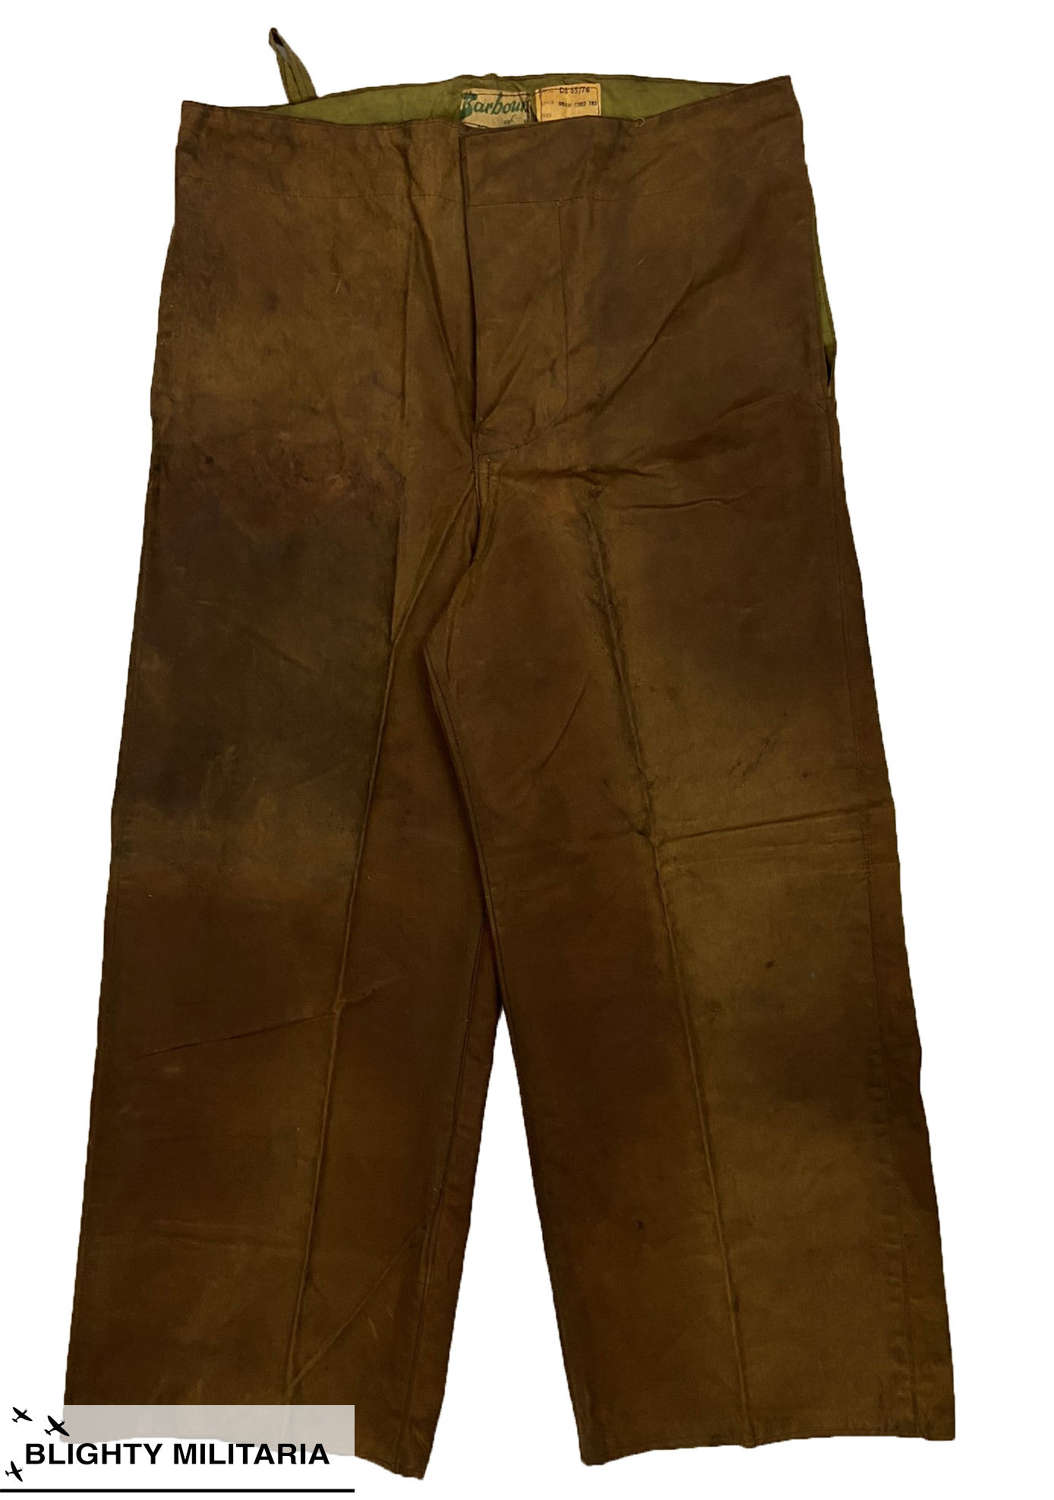 Rare Original 1950s Barbour Wax Cotton Trousers - Size Small